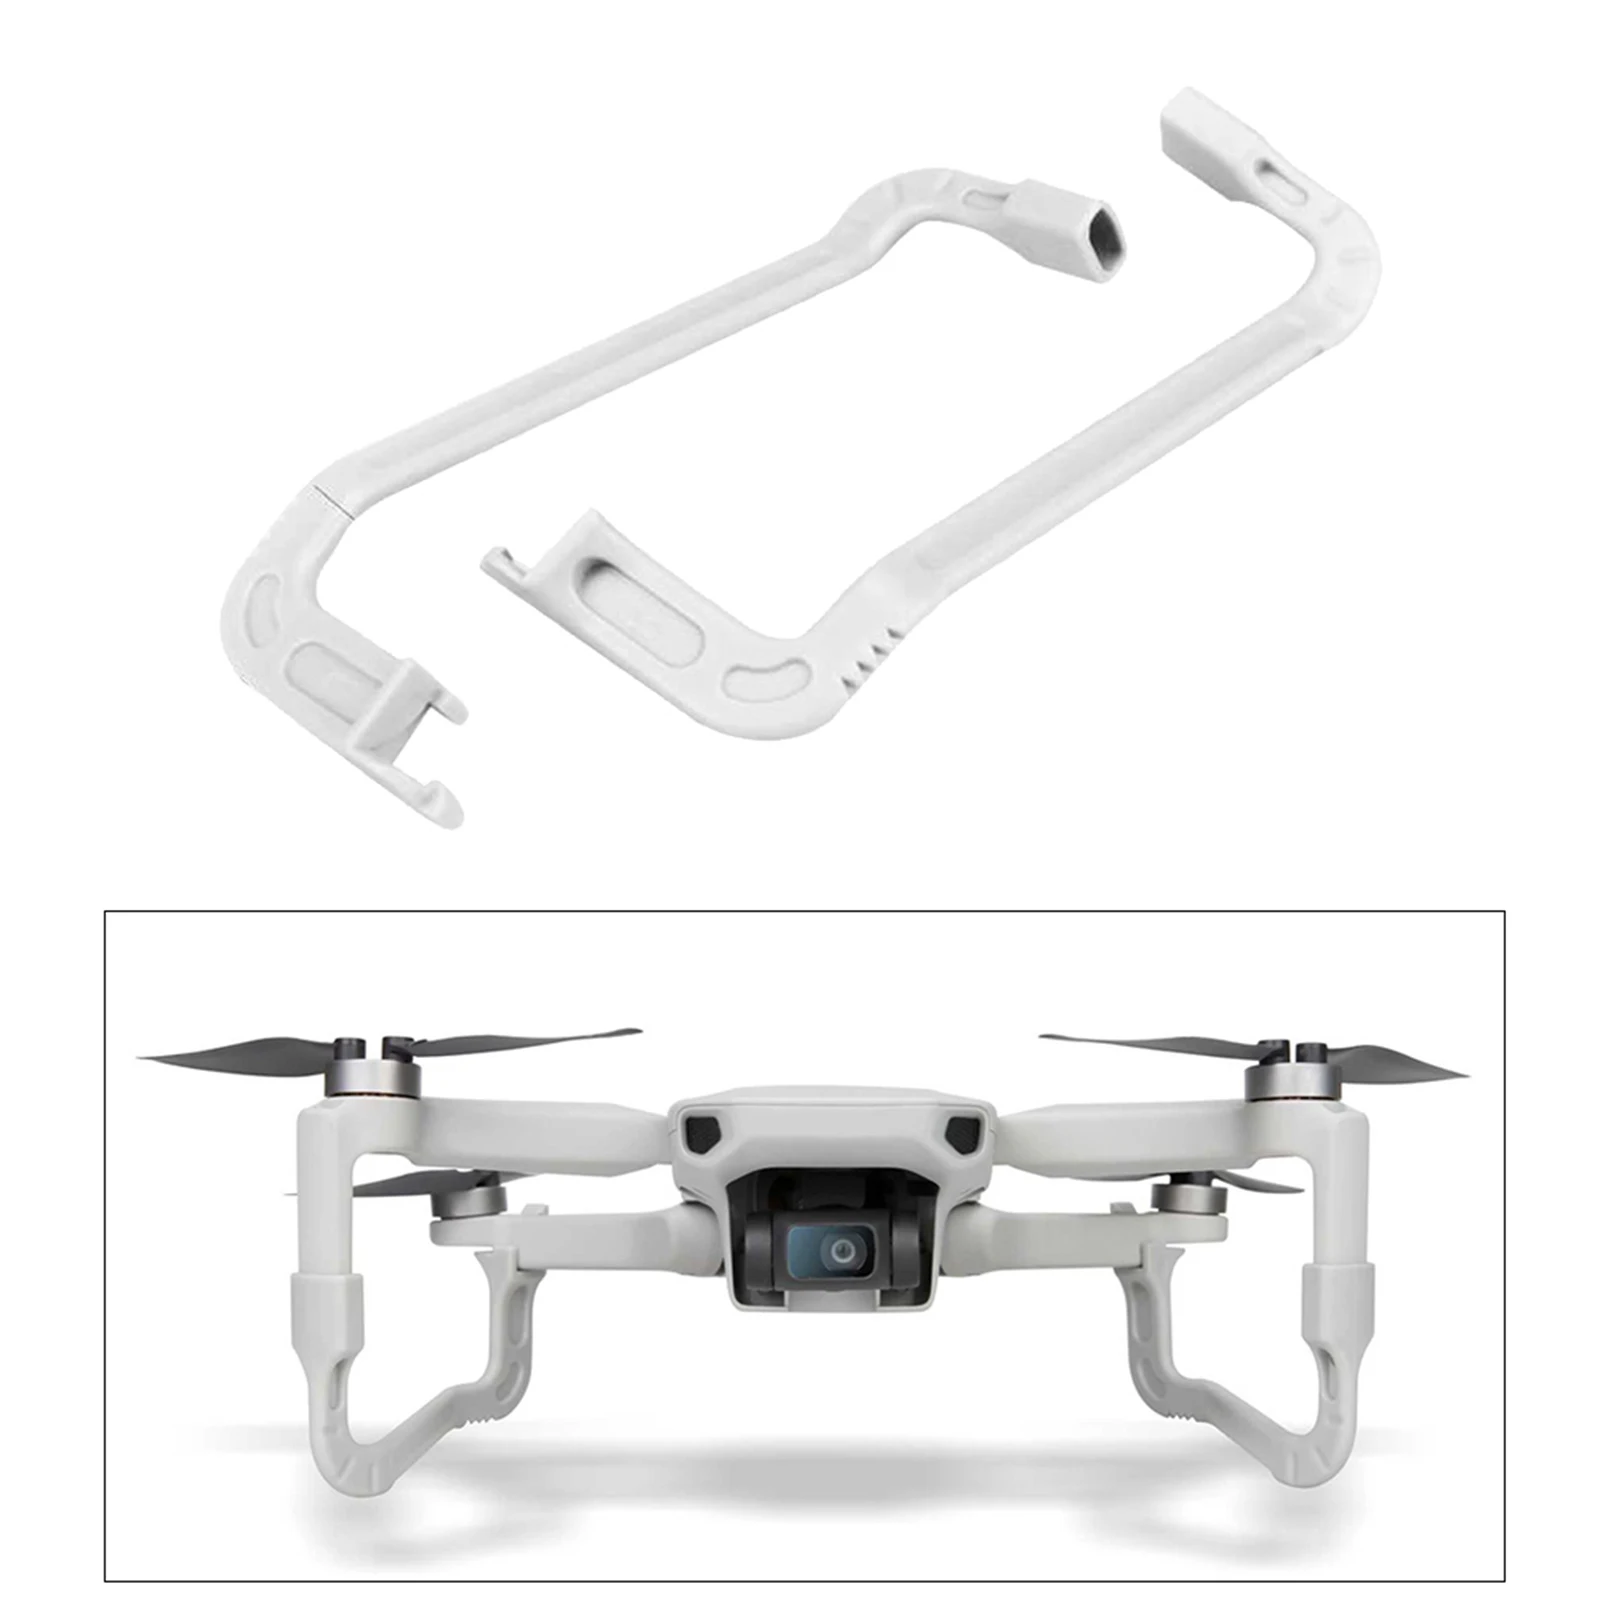 2 Packs Landing Gear Extensions Legs Extended Support Legs for DJI Mavic Mini 2/Mini Drone Accessories